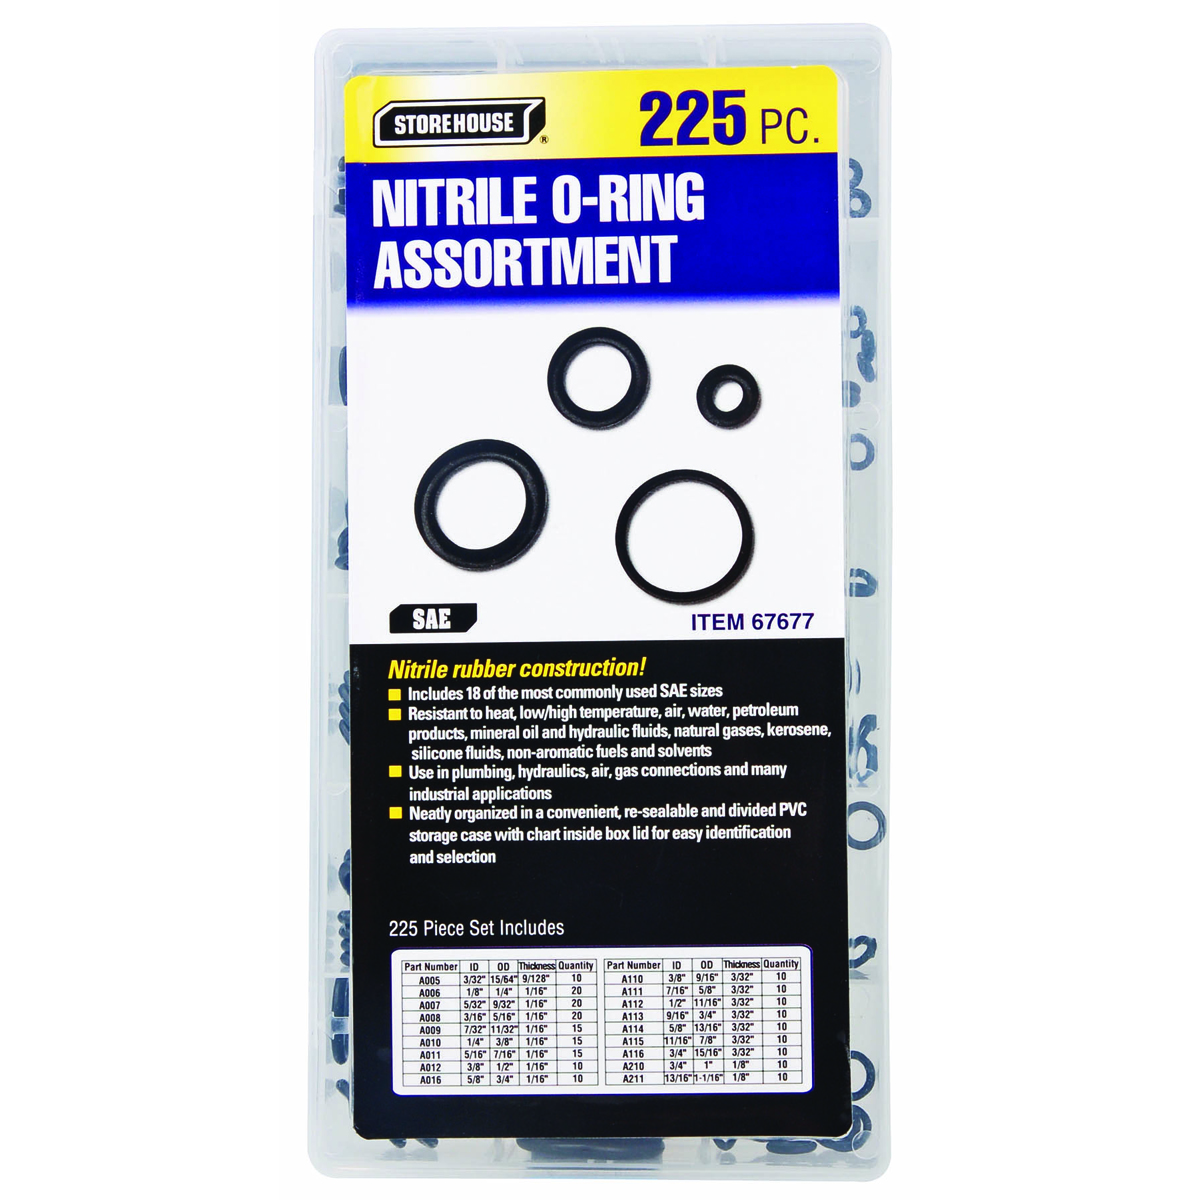 STOREHOUSE 225 Piece Nitrile O-Ring Assortment - Item 67677